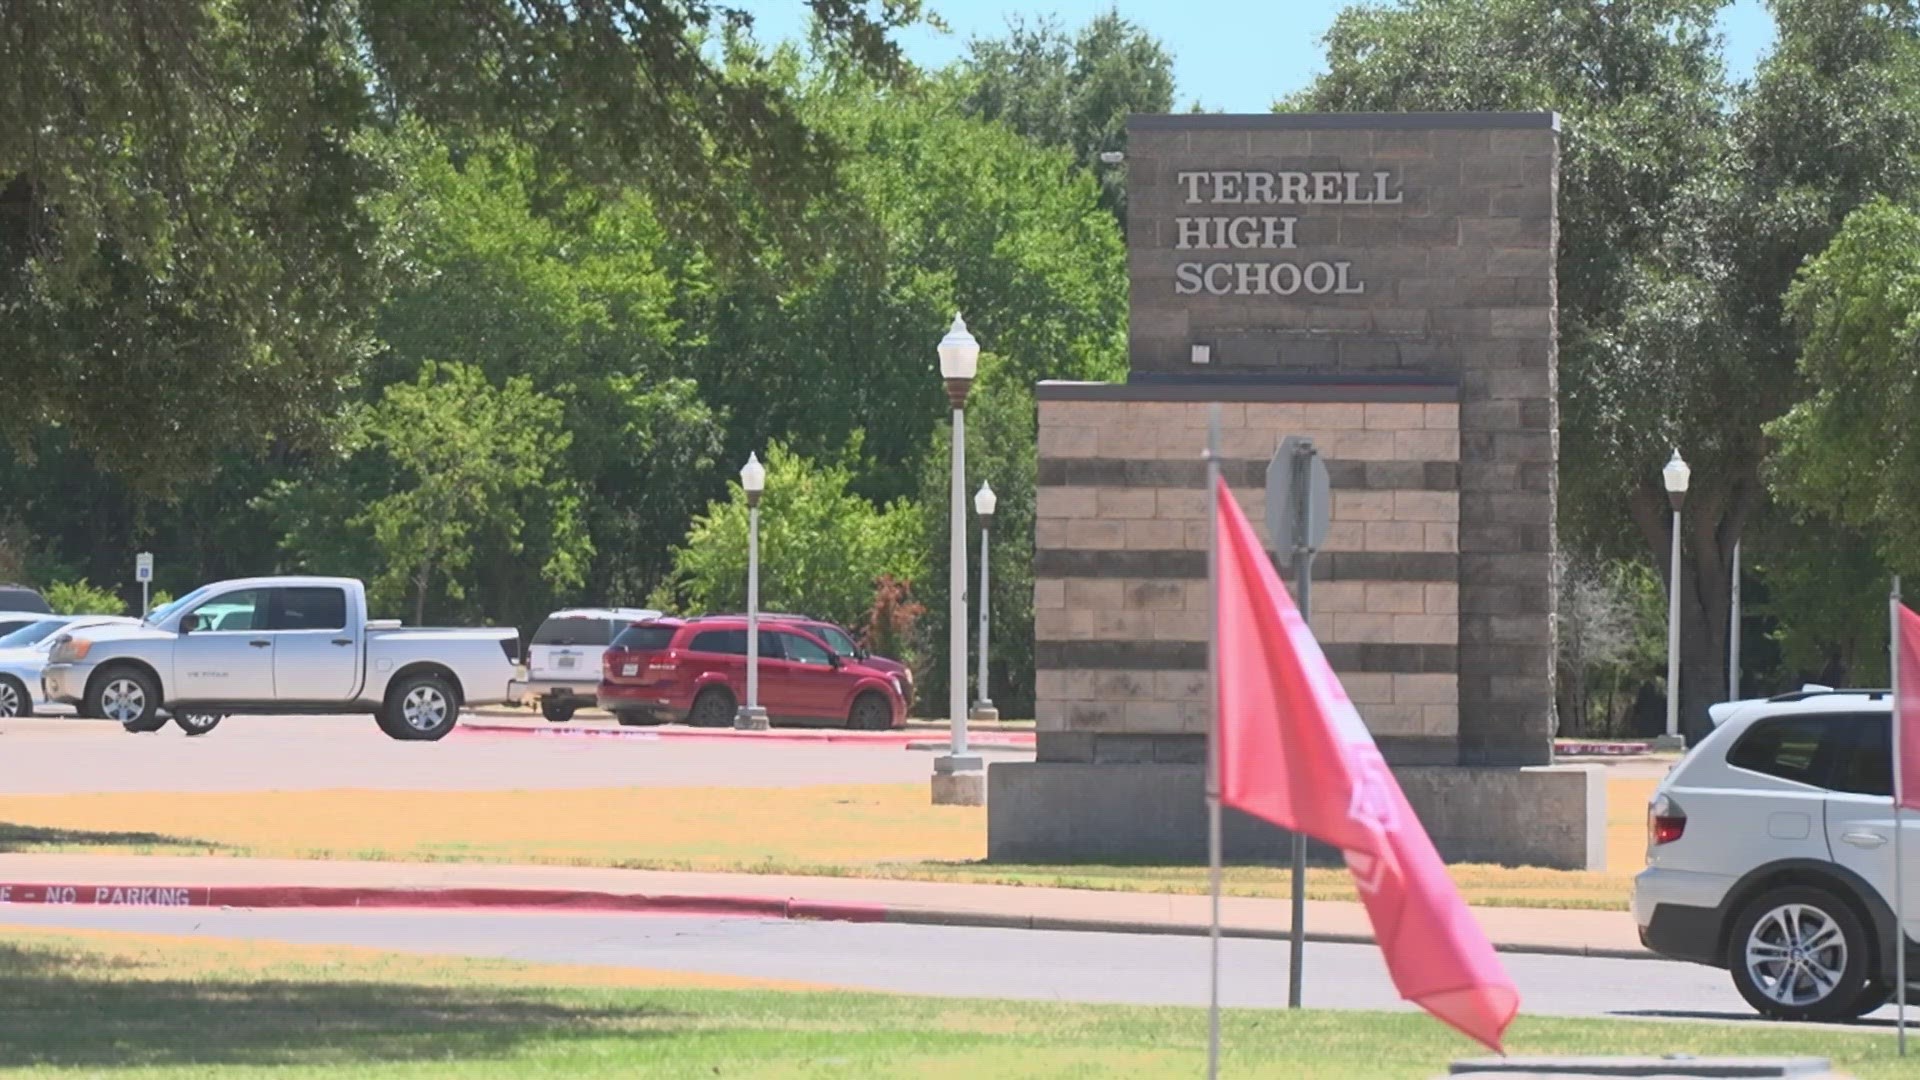 The student was shot and killed about a mile away from Terrell High School.